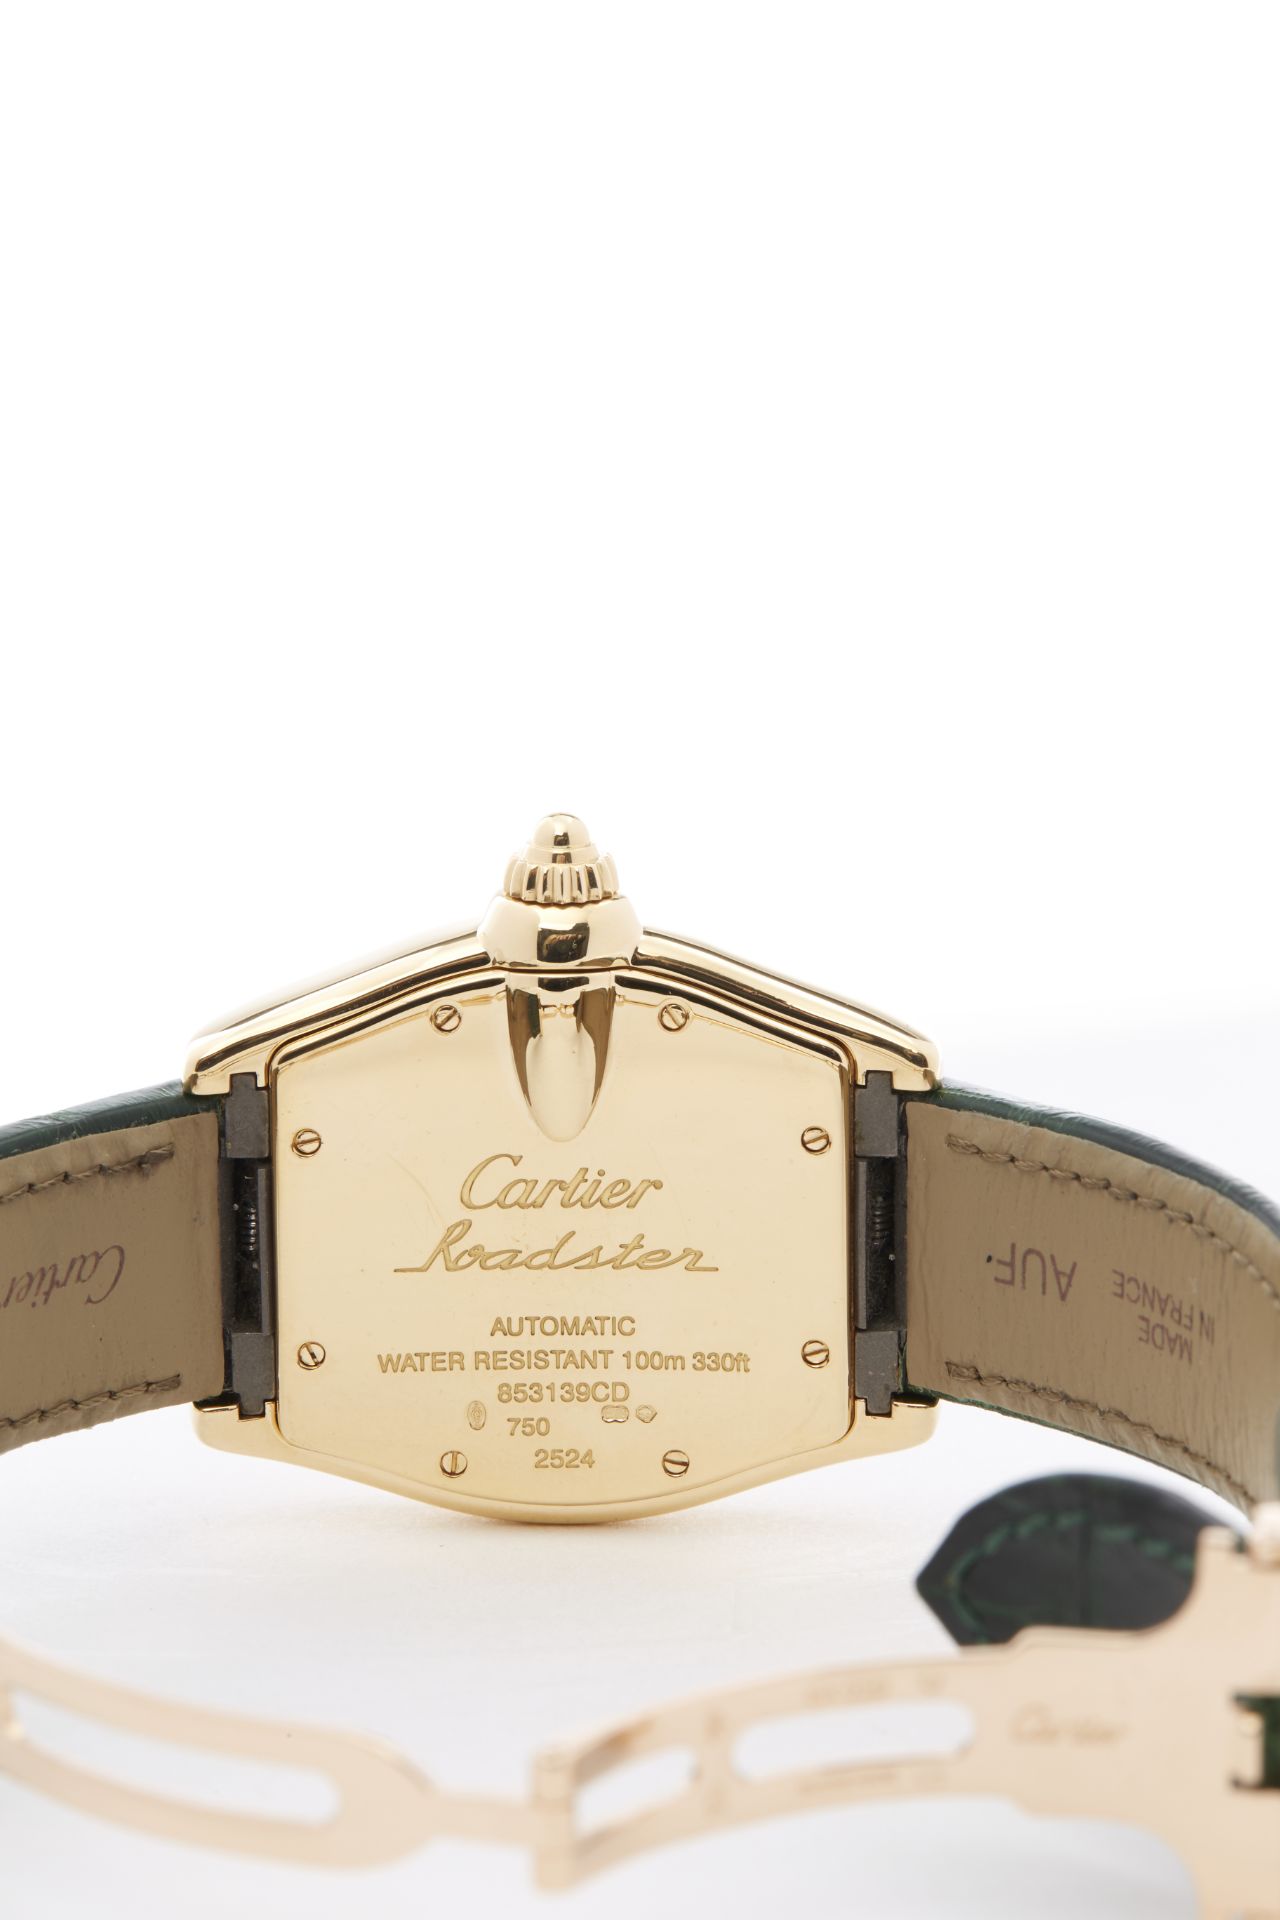 Cartier Roadster 18K Yellow Gold - W62005V2 - Image 5 of 11